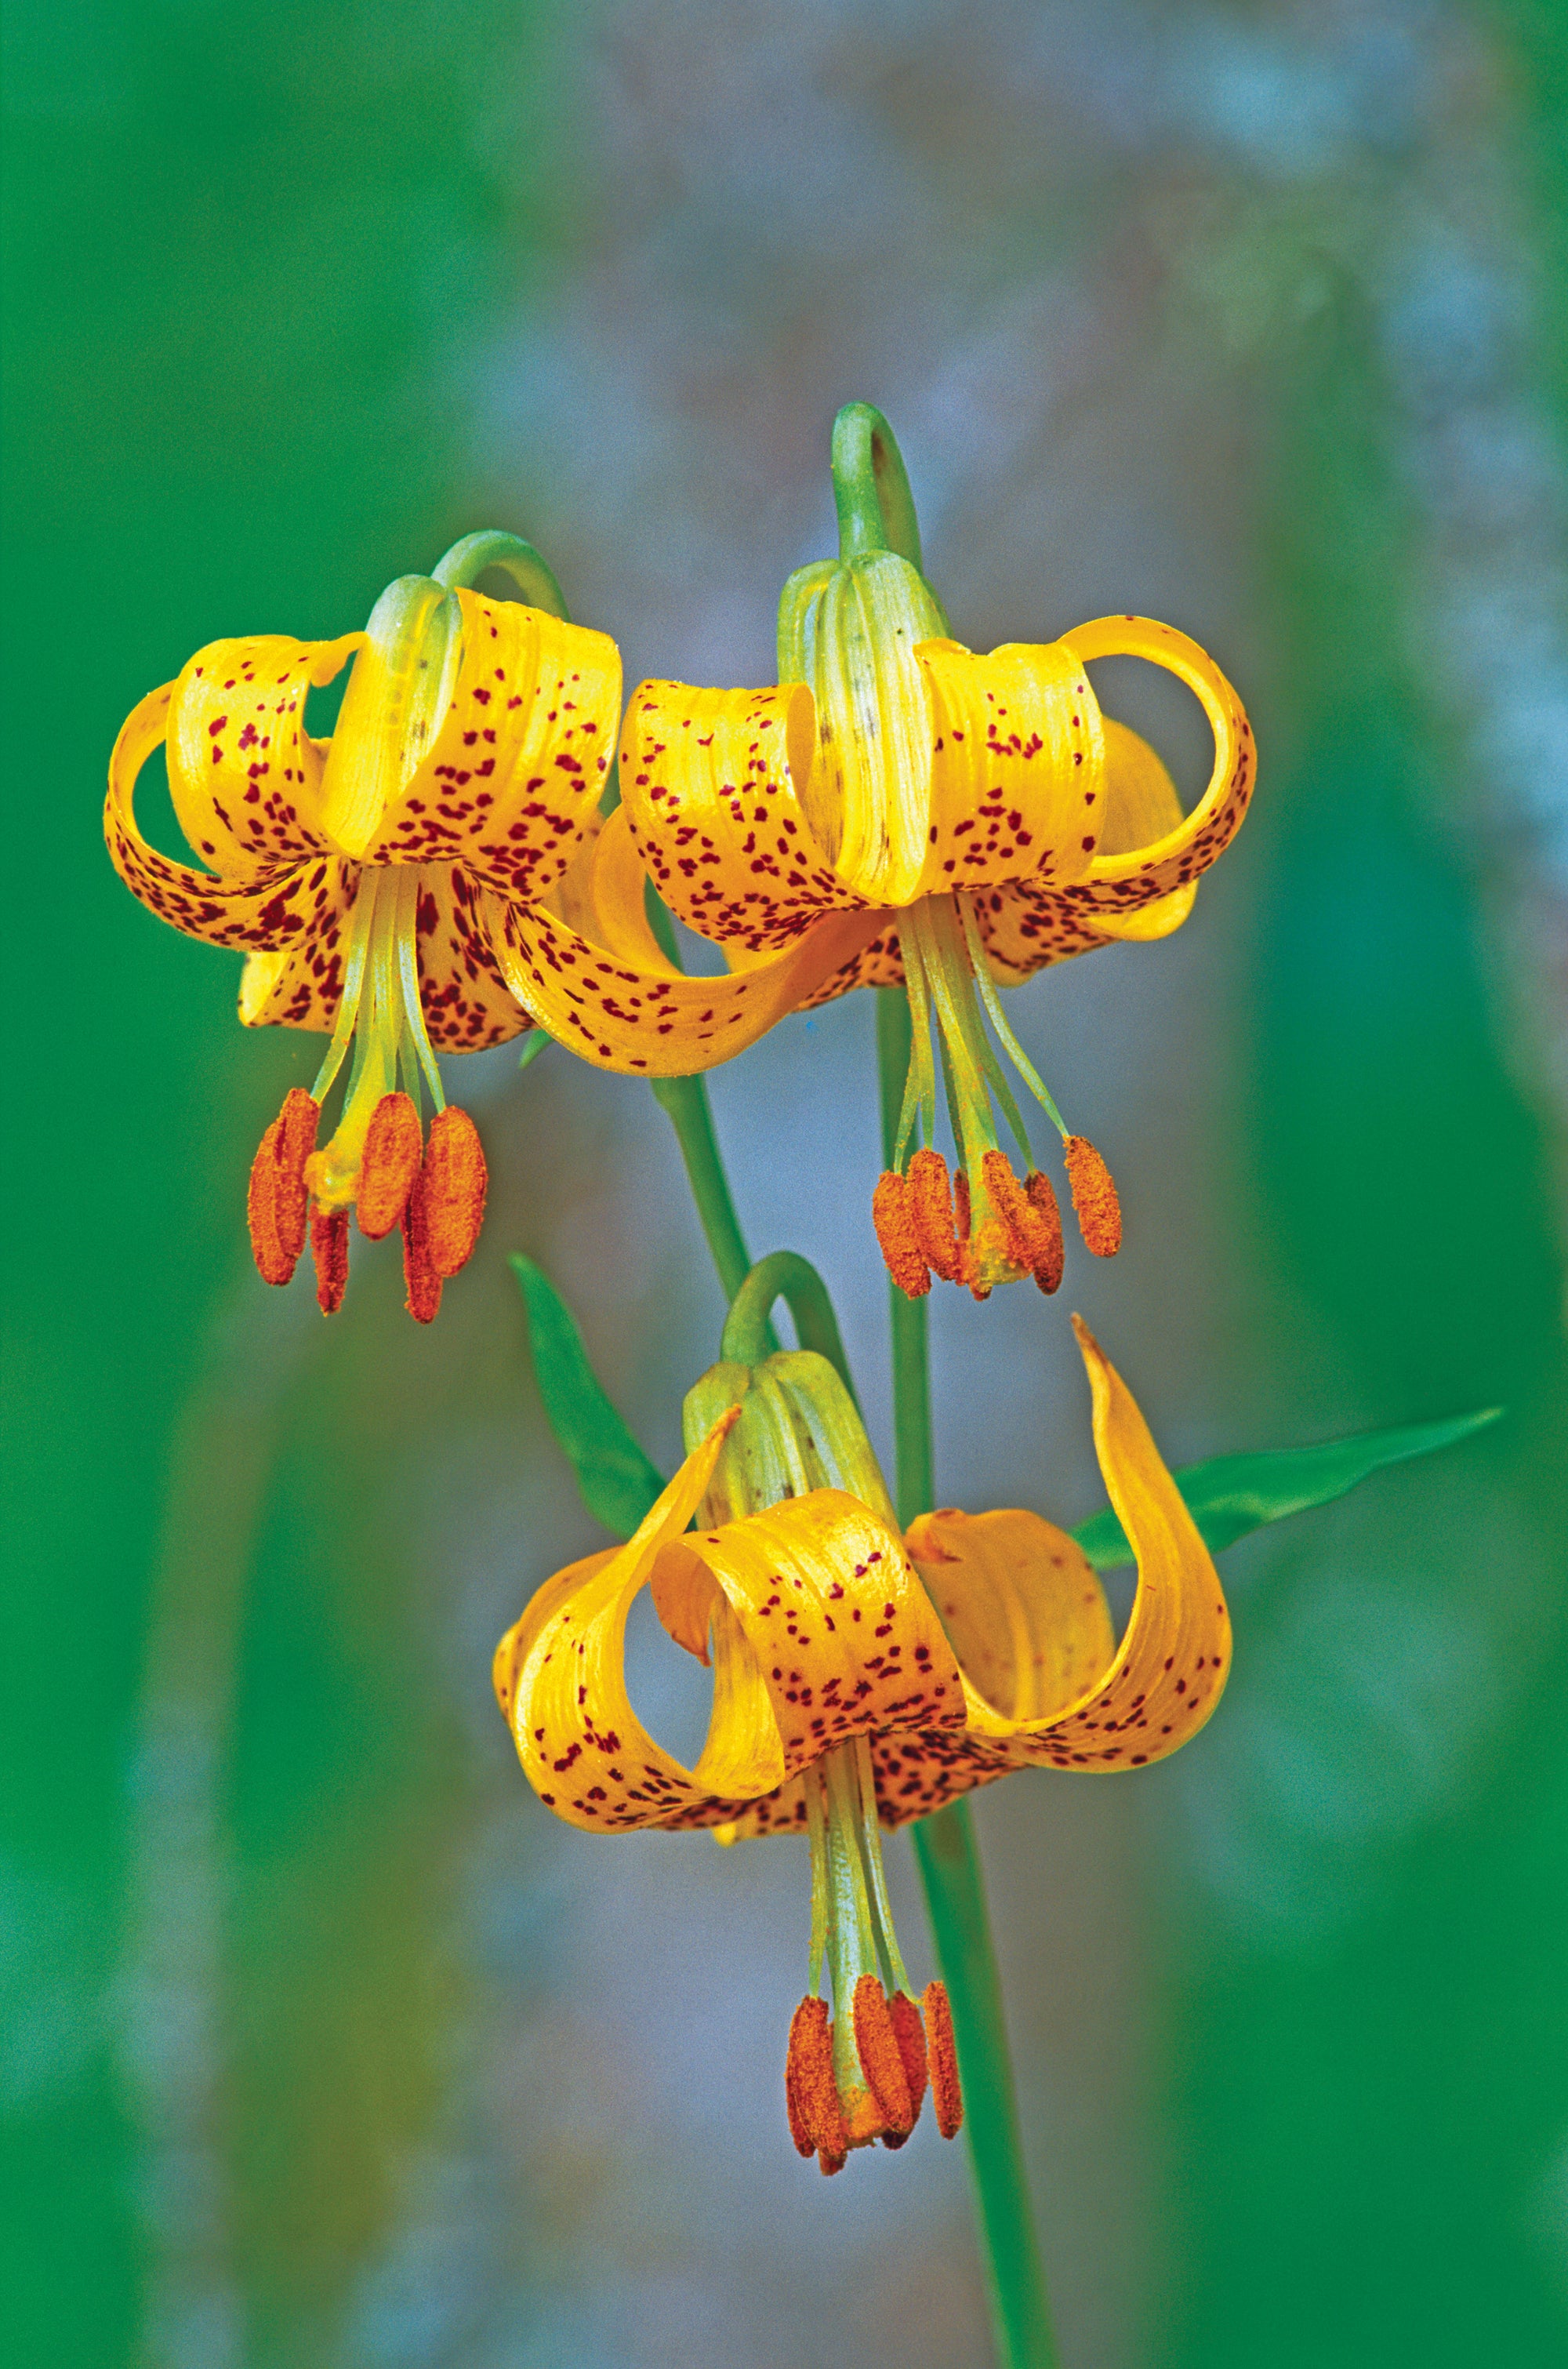 Three tiger lily flowers. End of image description.